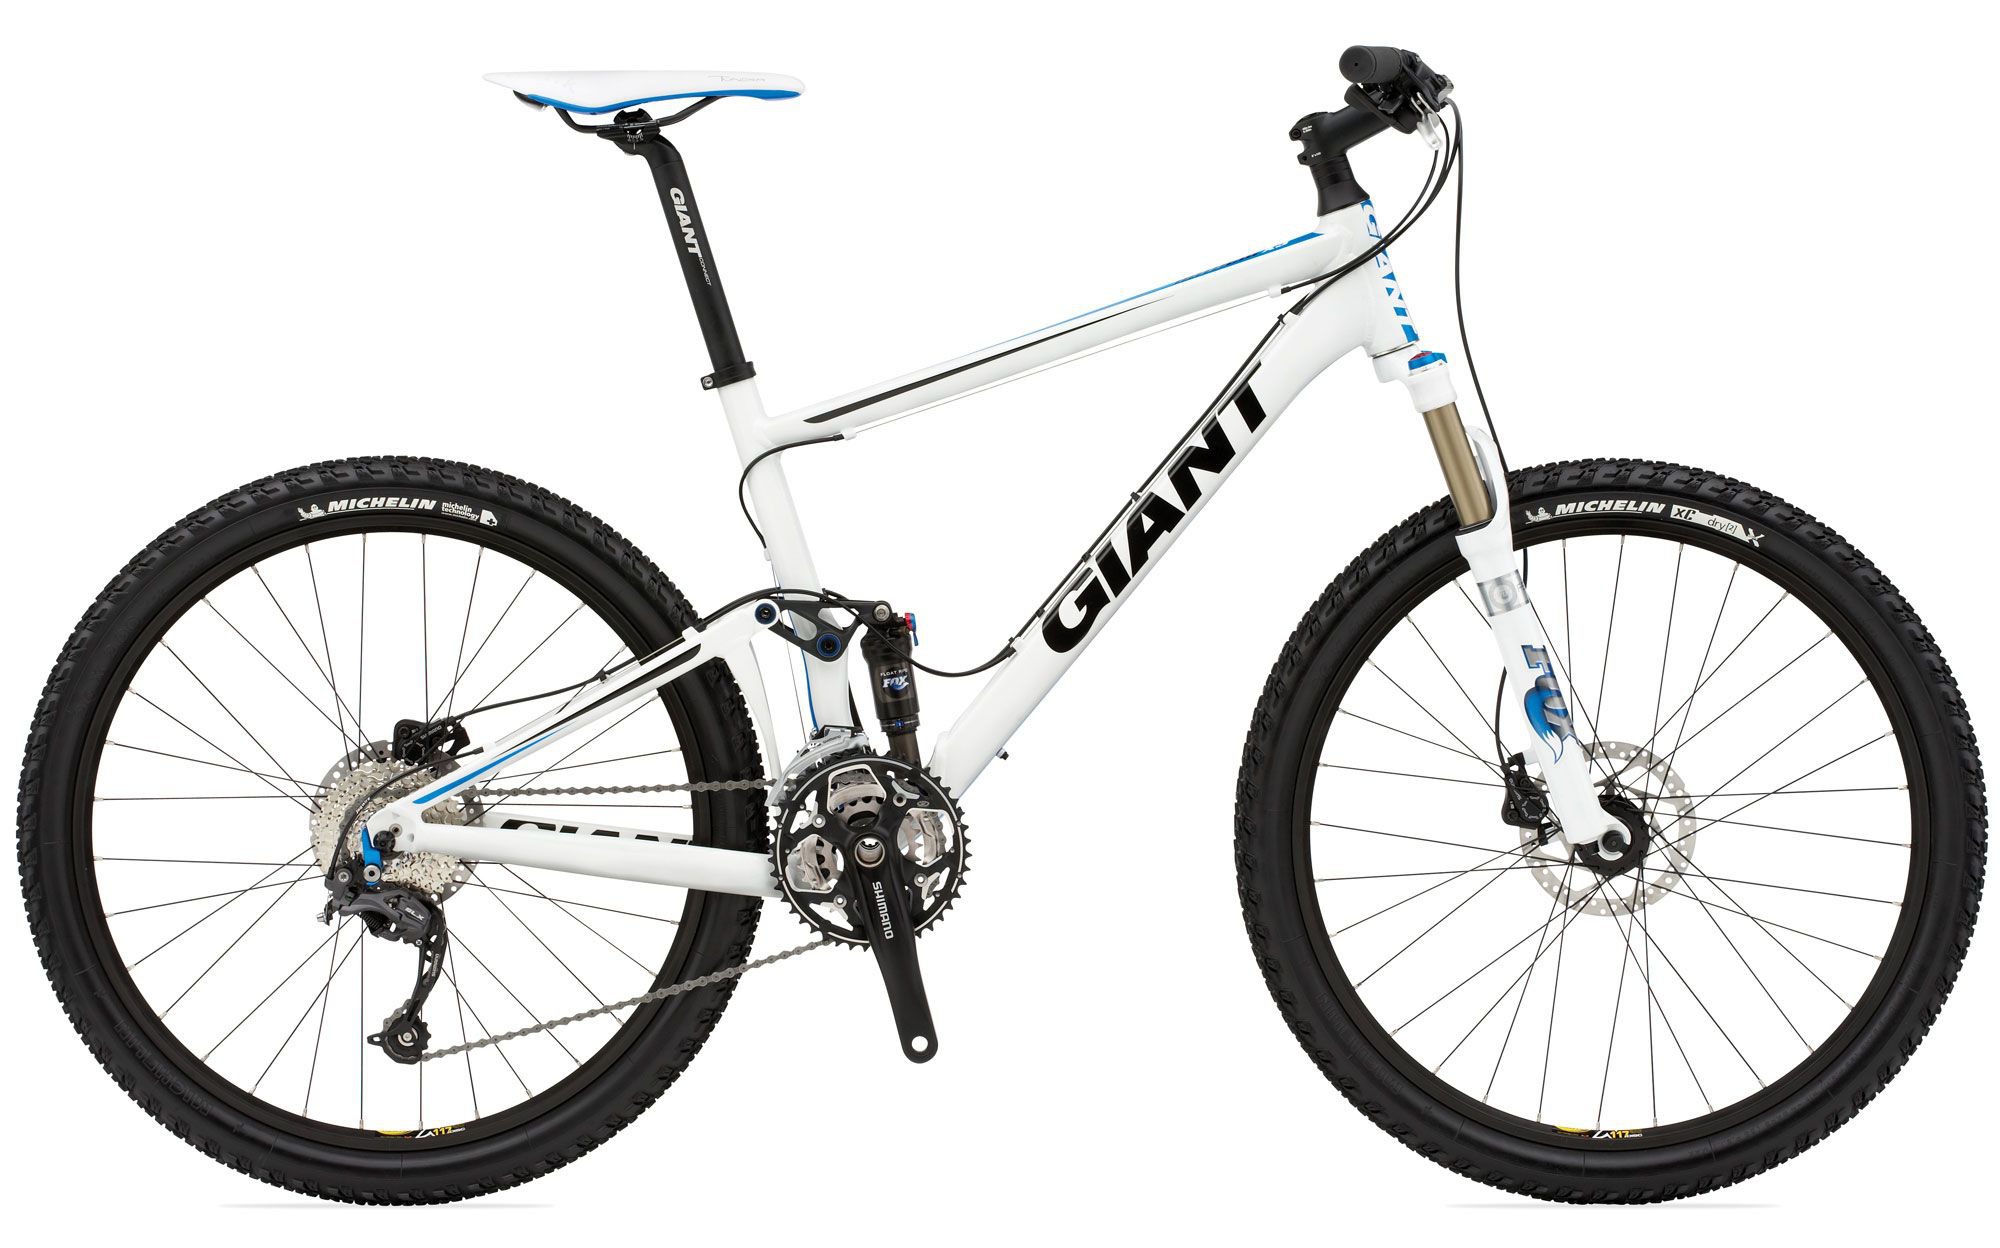 2010 Giant Anthem X3 - Bicycle Details 